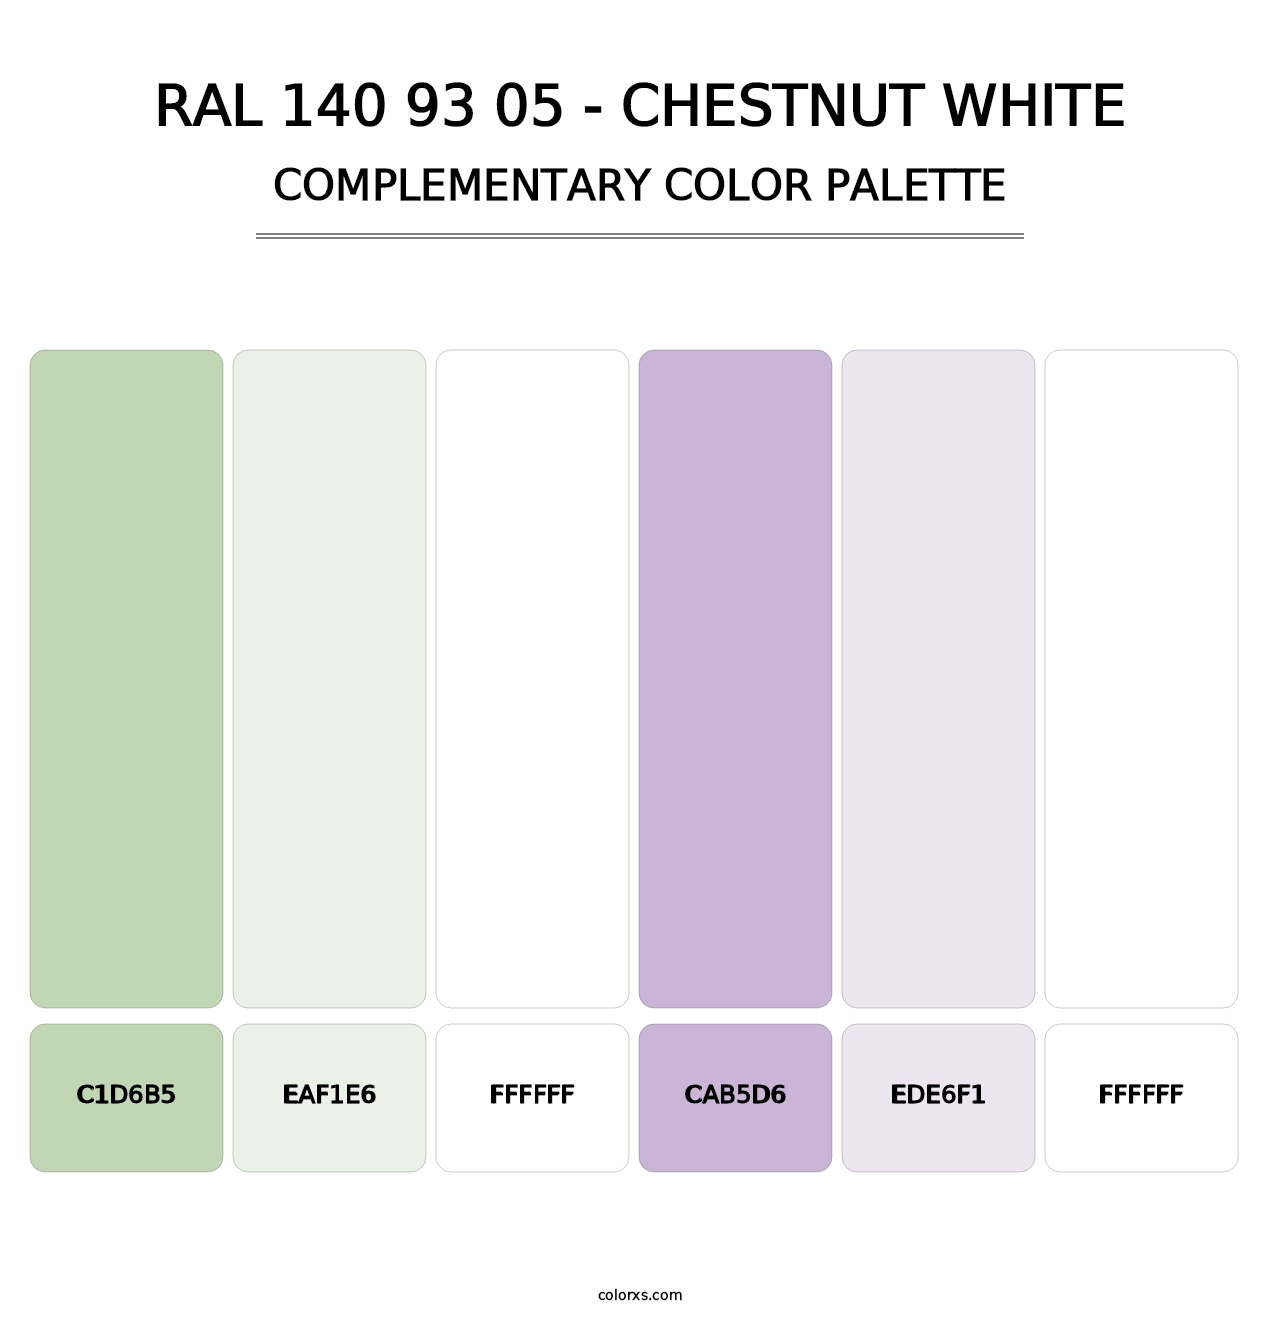 RAL 140 93 05 - Chestnut White - Complementary Color Palette